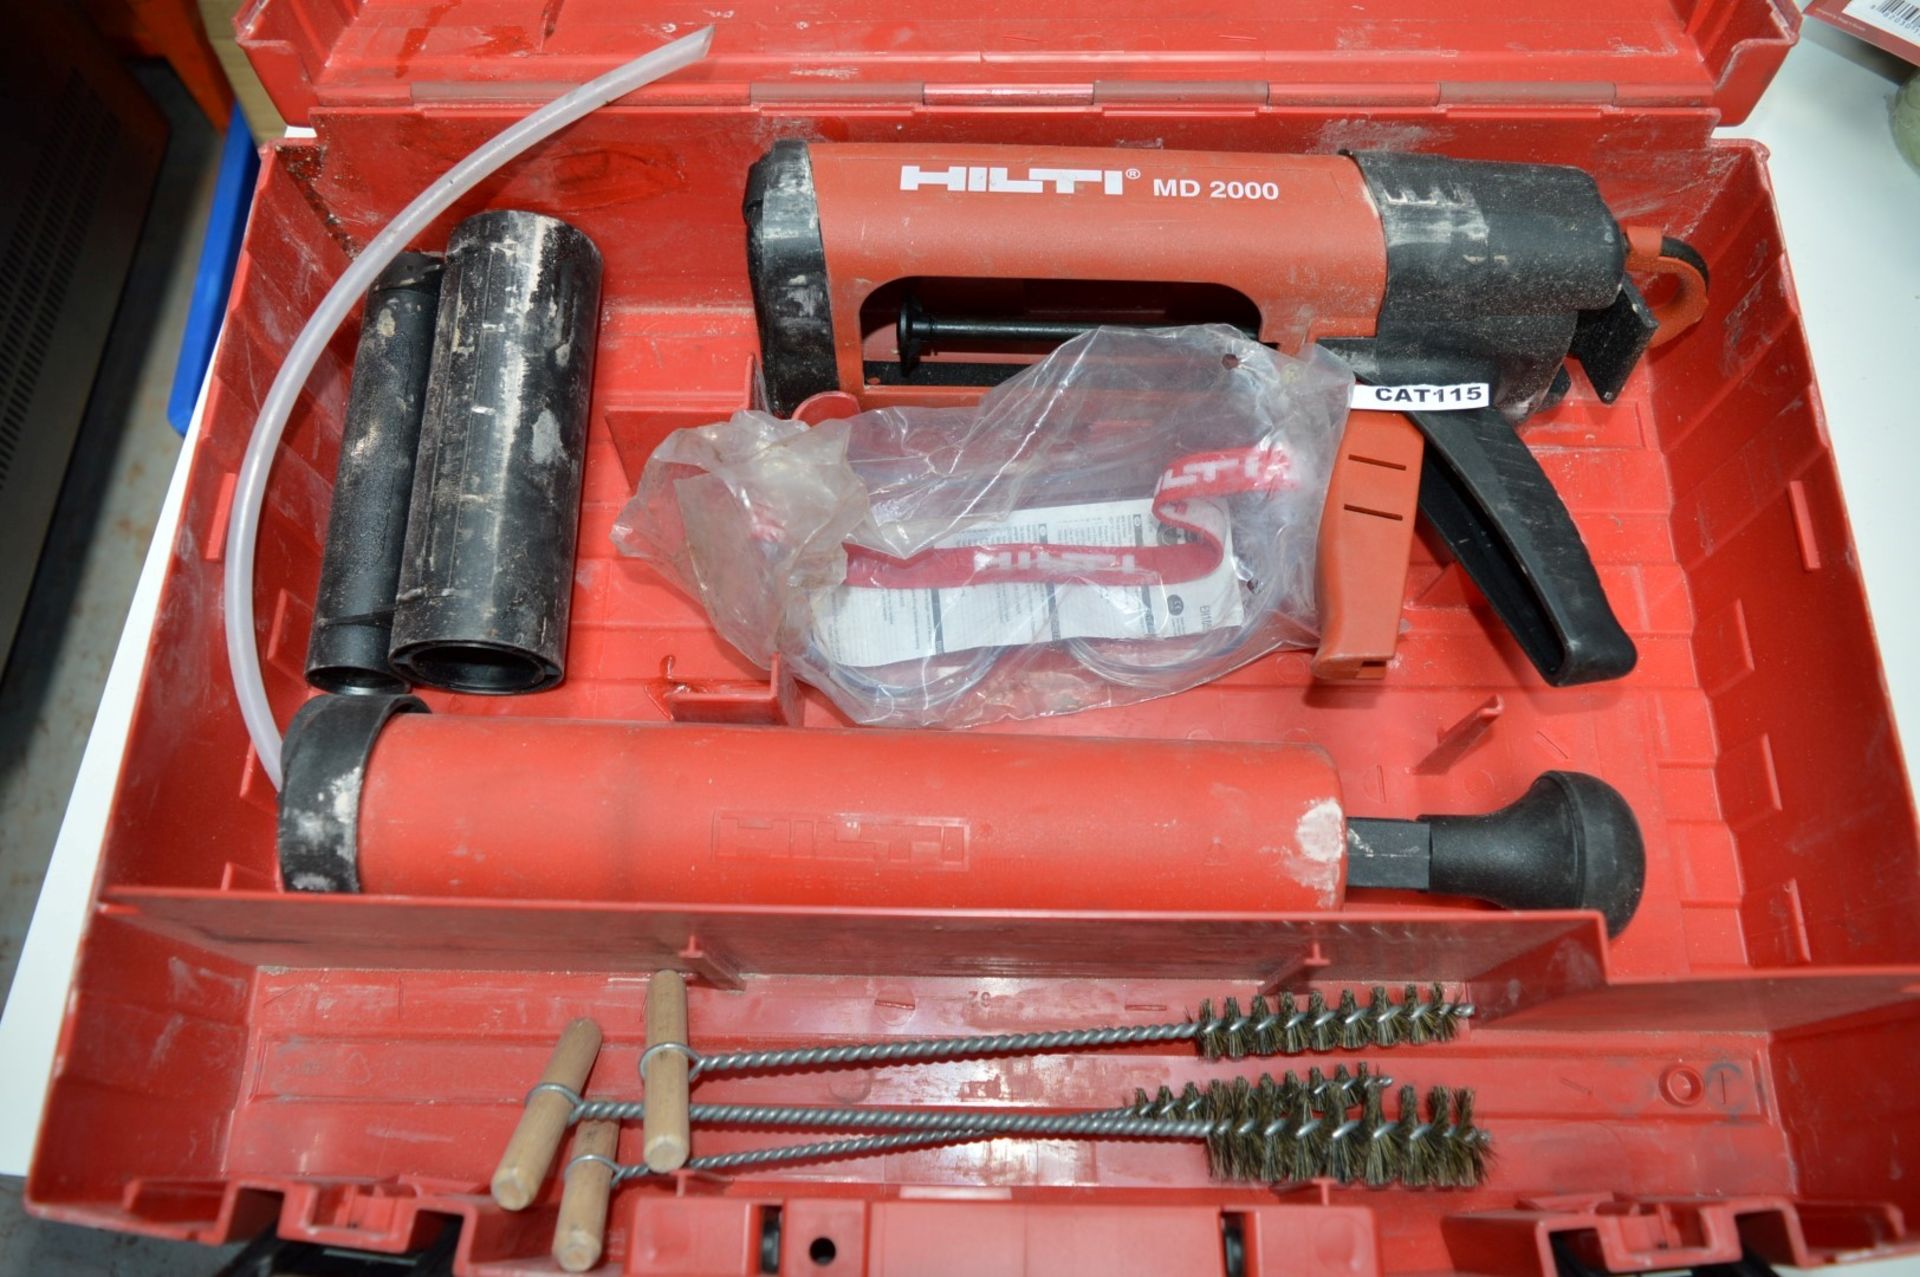 1 x Hilti MD2000 Manual HIT Adhesive Dispenser With Case, Pump, Brushes and Goggles - CL300 - Ref - Image 2 of 4